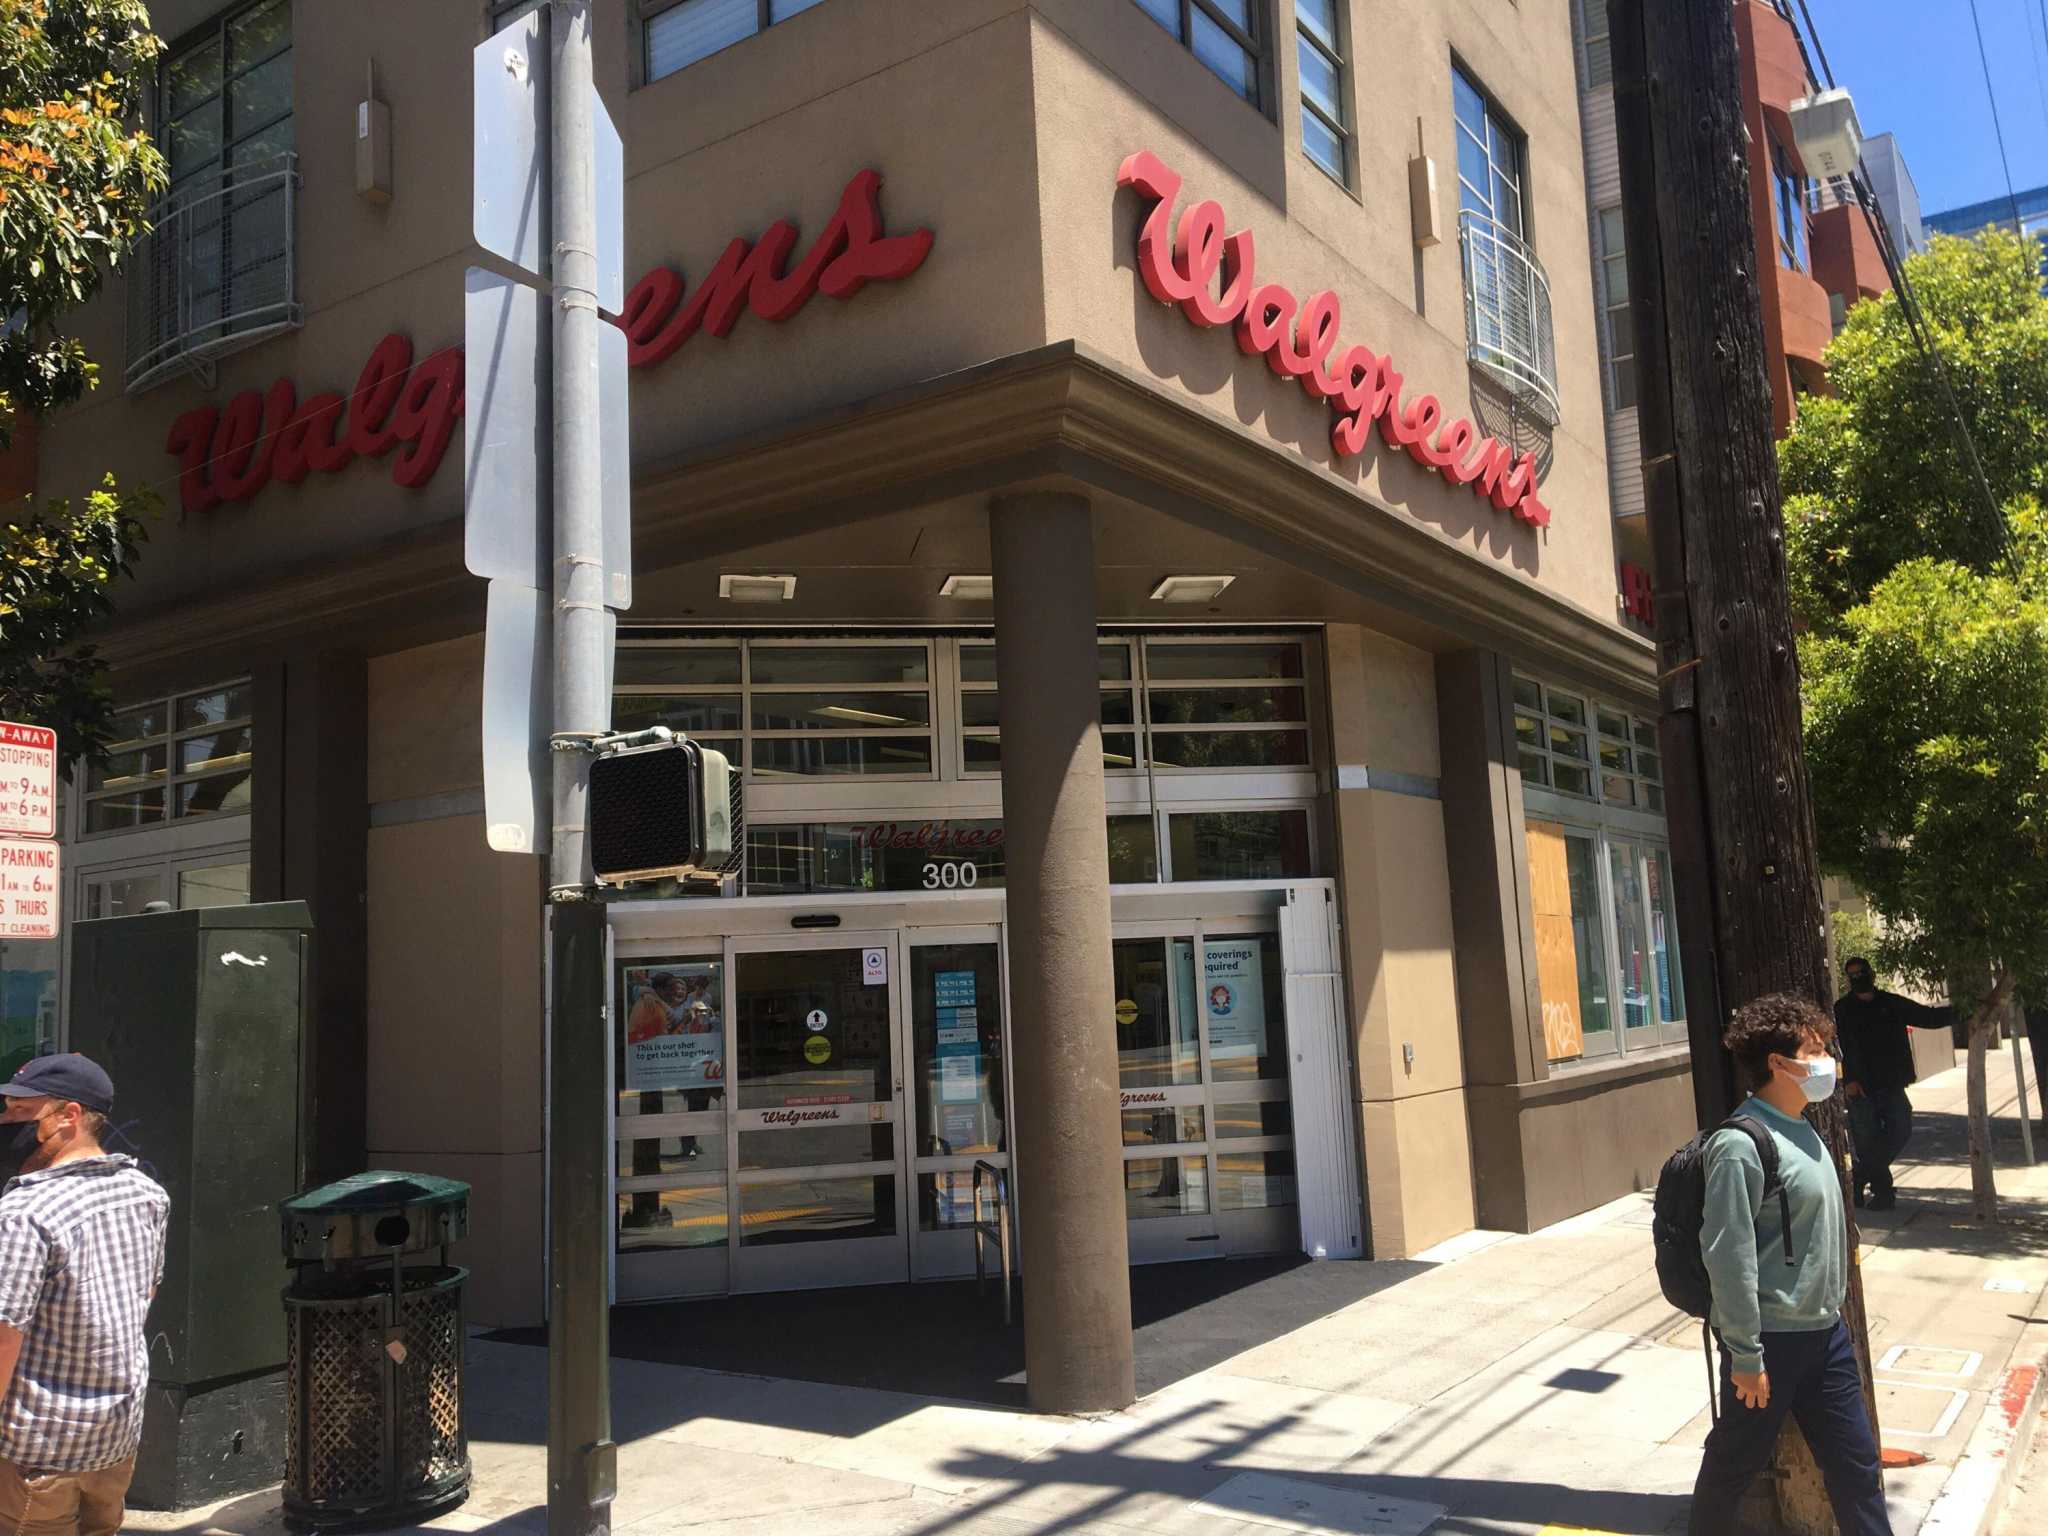 Walgreens to Close 5 Stores in San Francisco, Citing